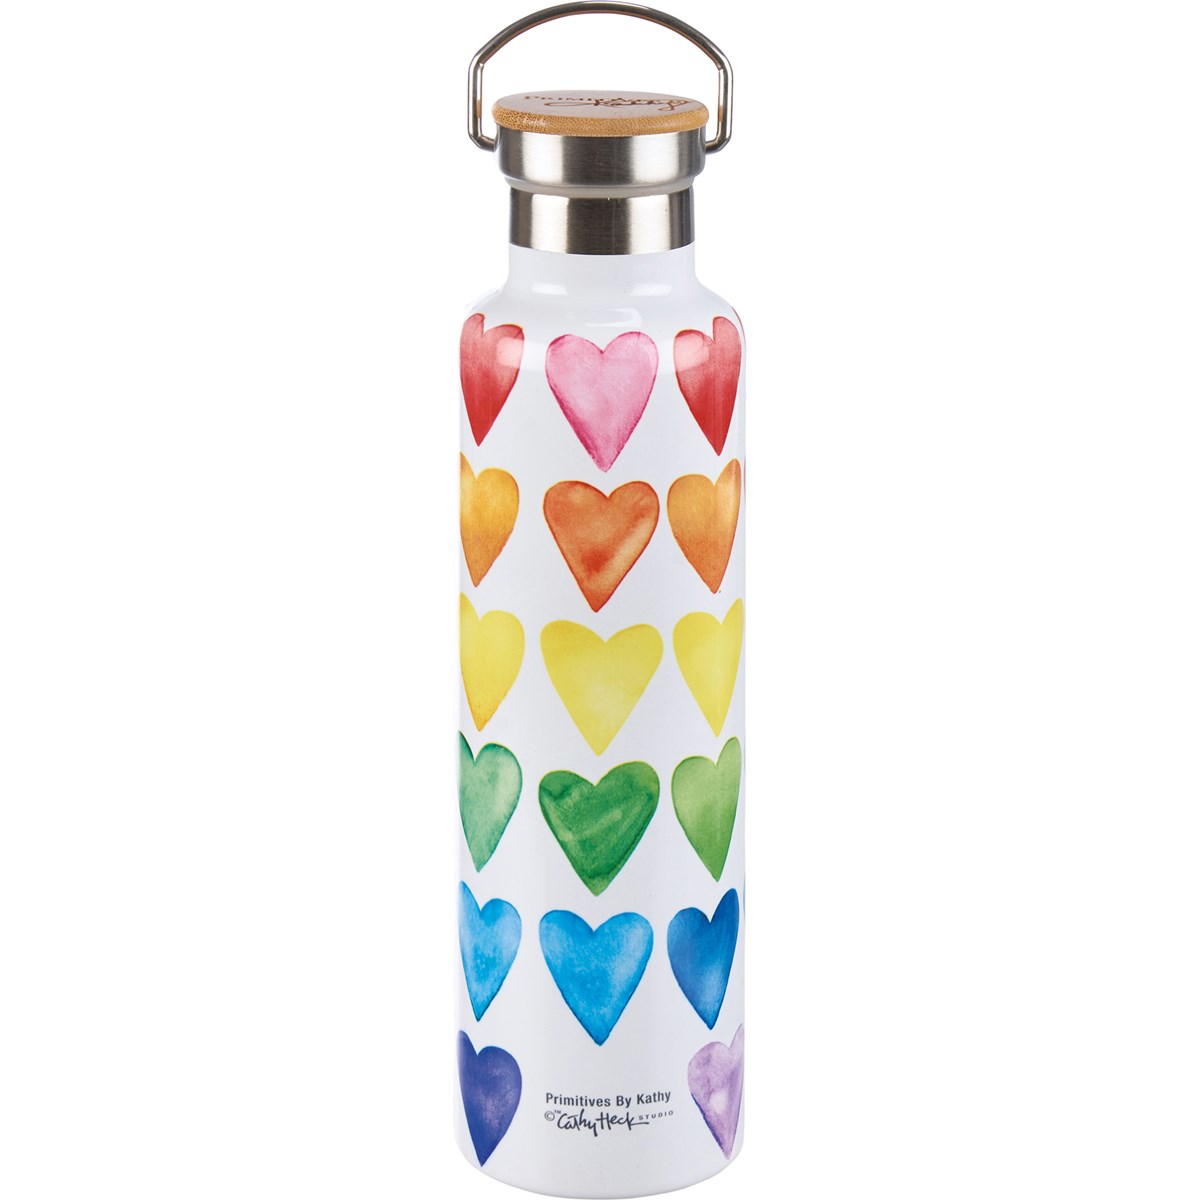 Insulated Bottle - Hearts - 25 oz., 2.75" Diameter x 11.25" - Stainless Steel, Bamboo